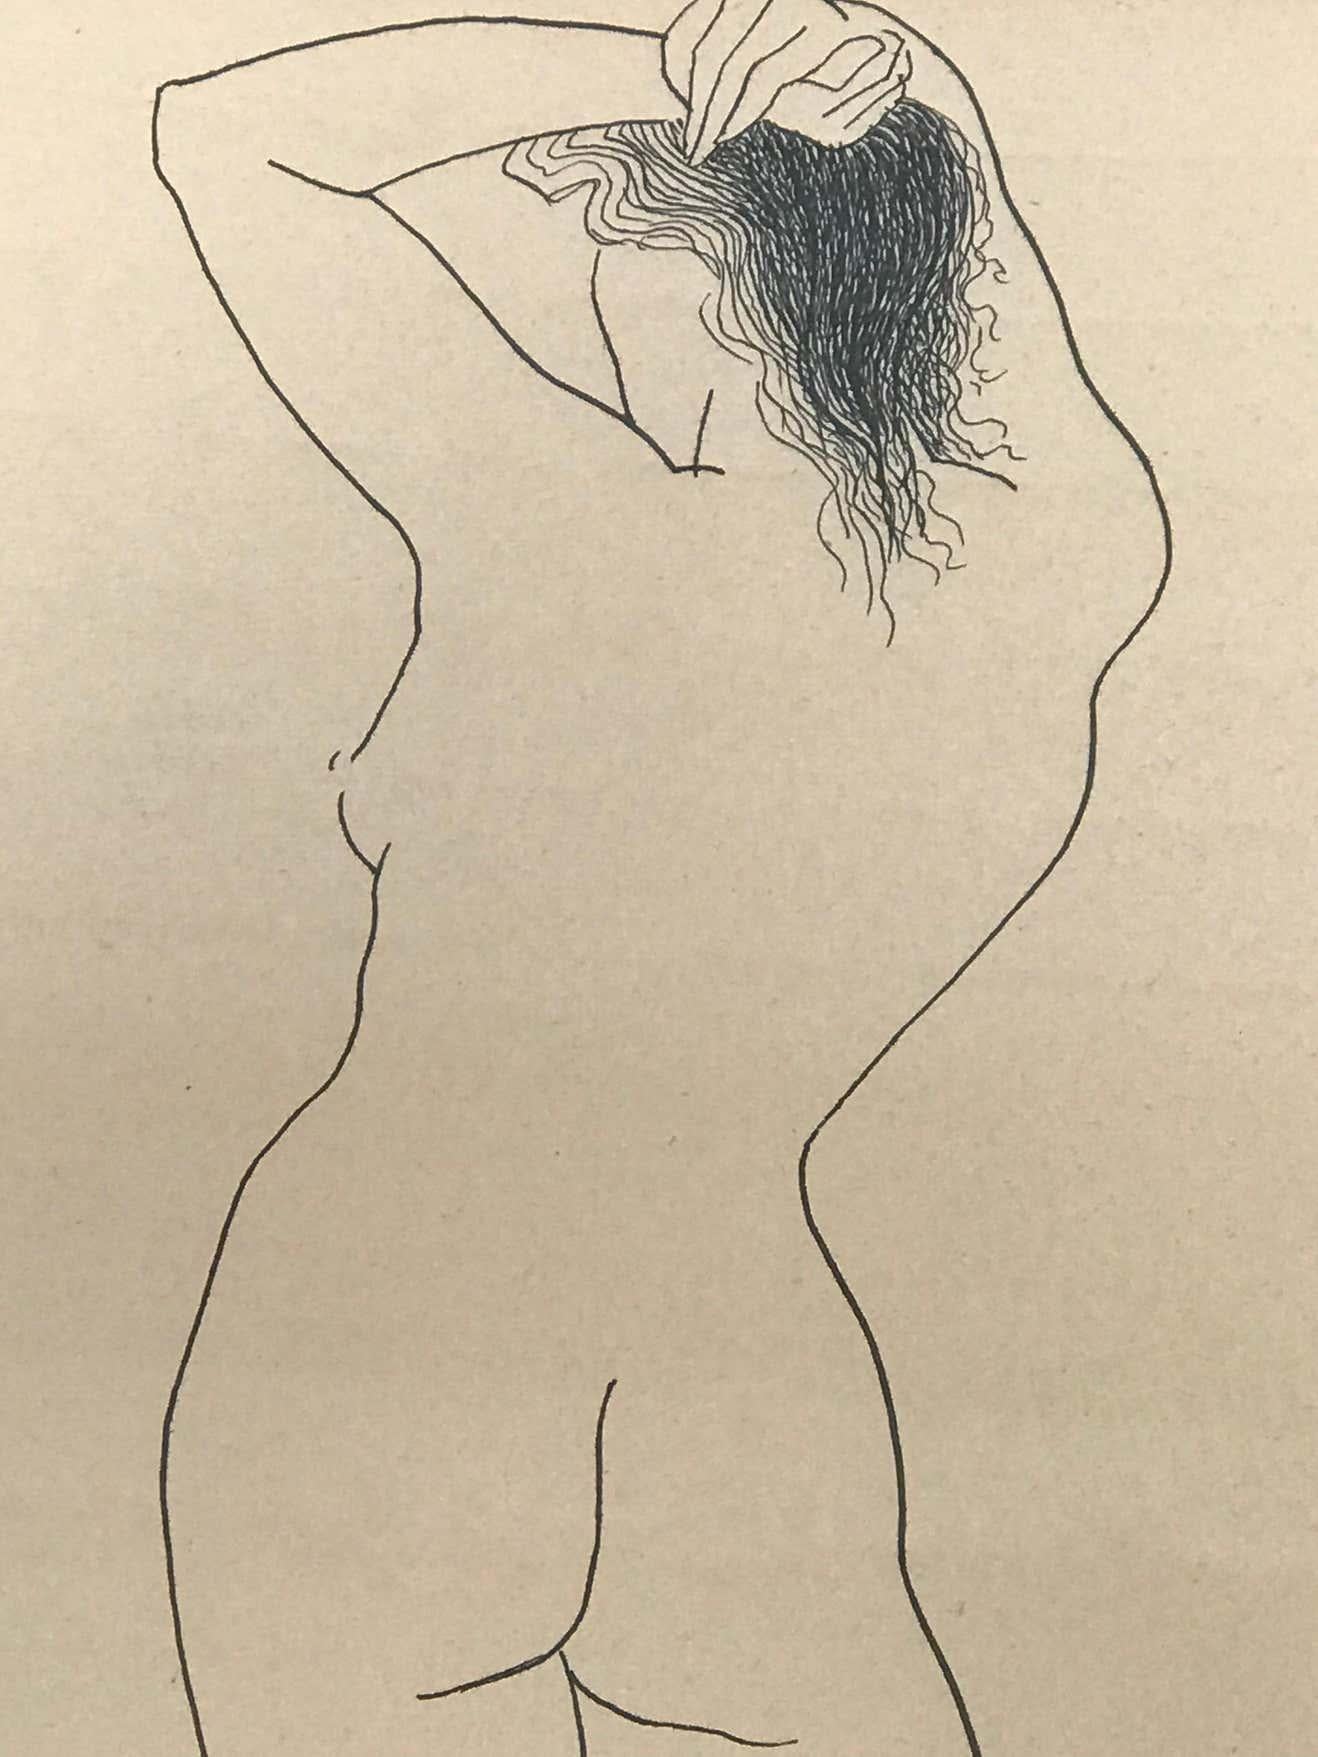 Gracious nude of a woman drawn with ink on craft paper.
Jerry O'Day is also known as Geraldine Heib. Born in Oakland, CA on June 17, 1912. Geraldine Heib assumed the name Jerry O'Day at an early age. She grew up in Washington and studied in Seattle